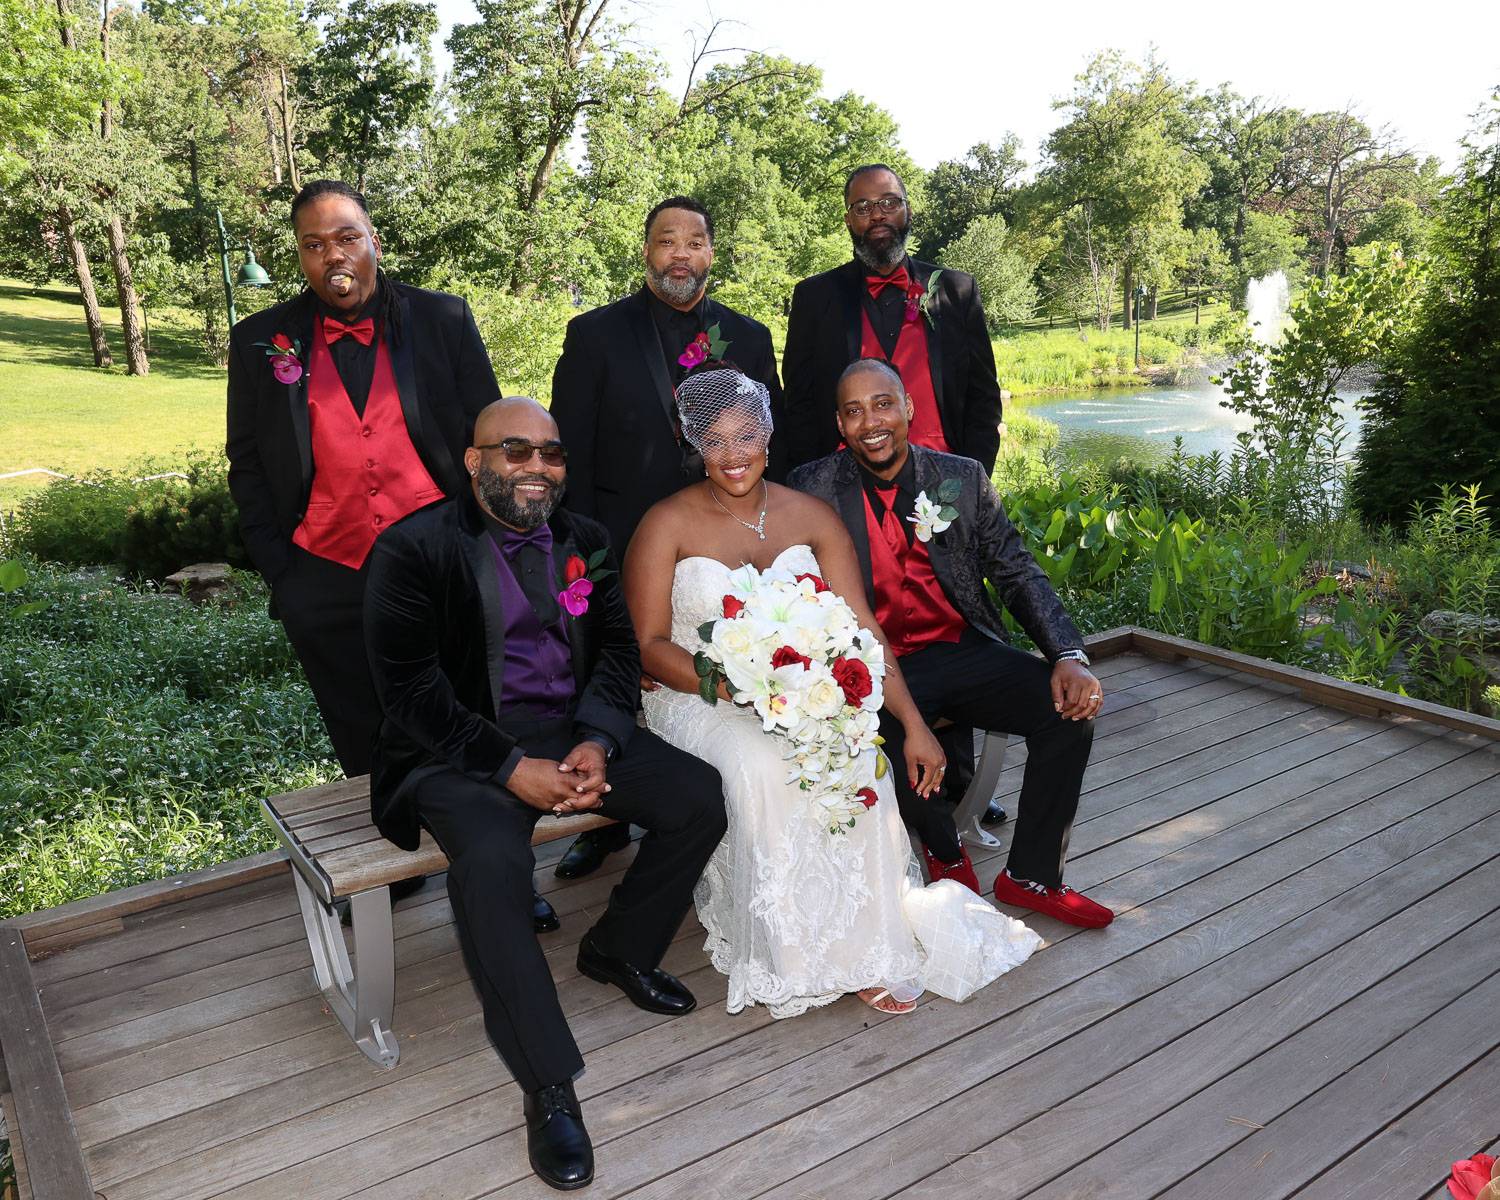 The newlyweds with the groomsmen